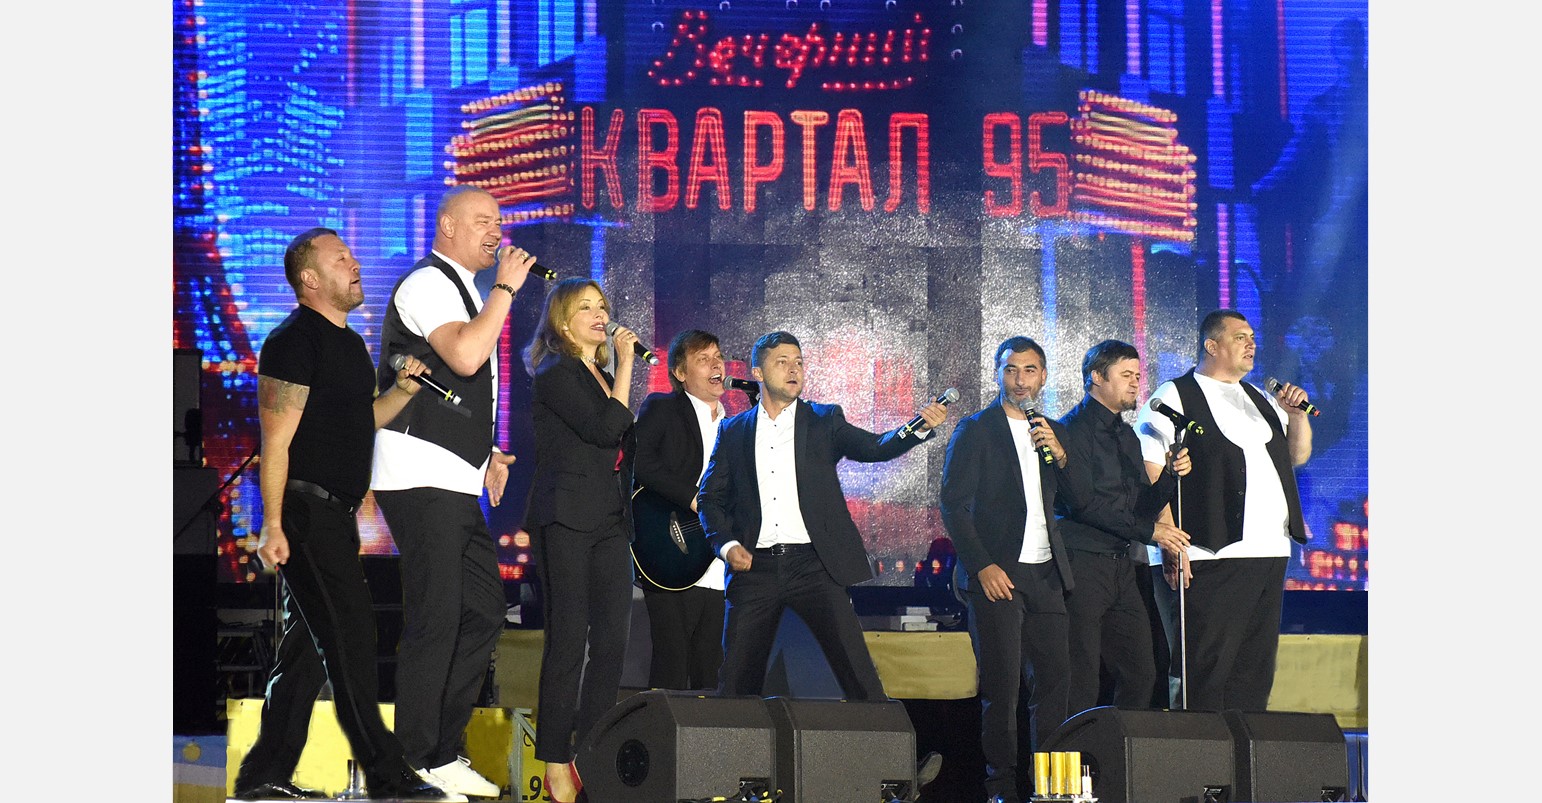 Volodymyr Zelenskyi (center) performing on stage with his comedy group KVARTAL 95 in August 2018 (Photo: Vadym Chupryna / Wikipedia)